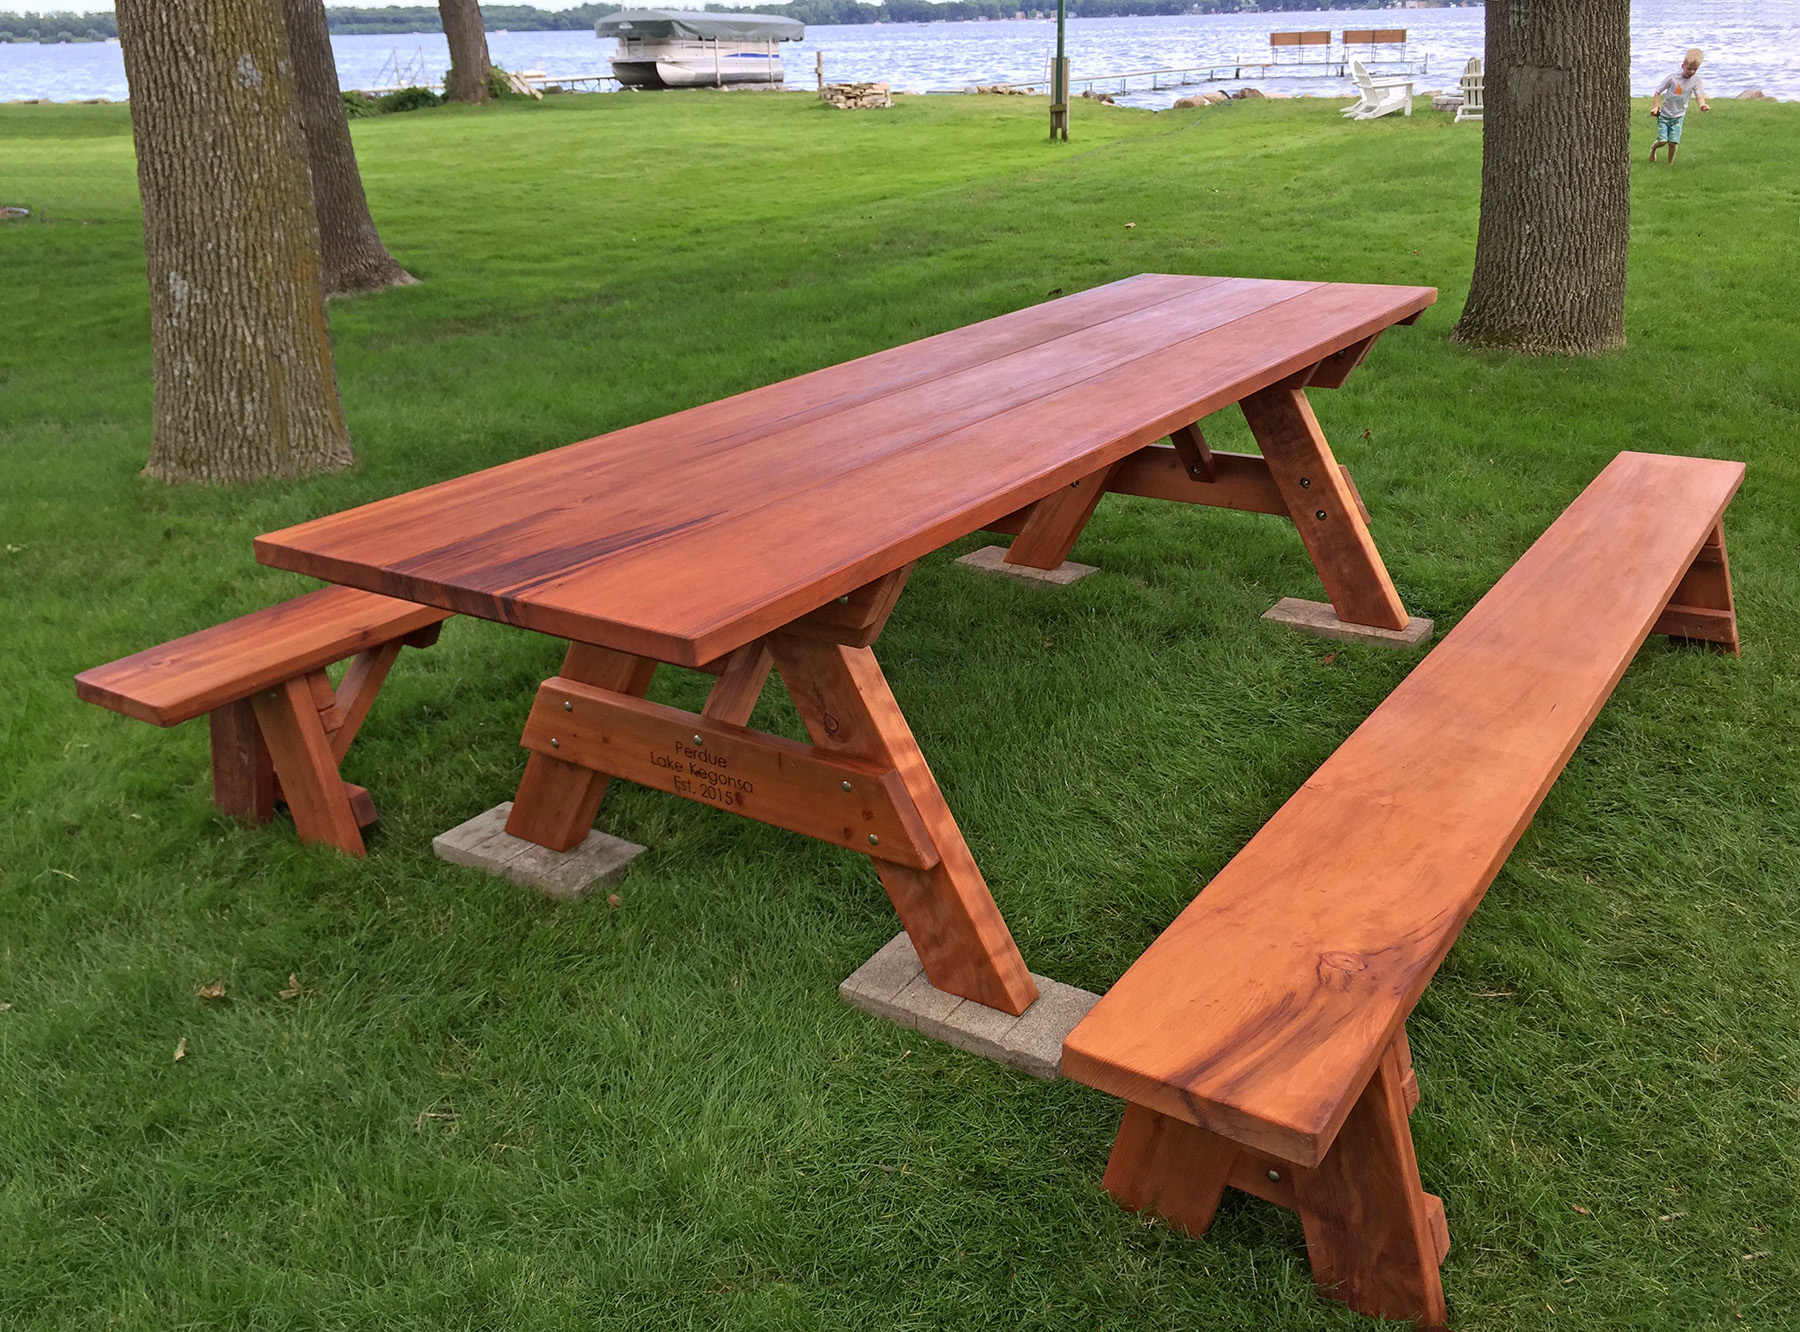 Wooden picnic table kit